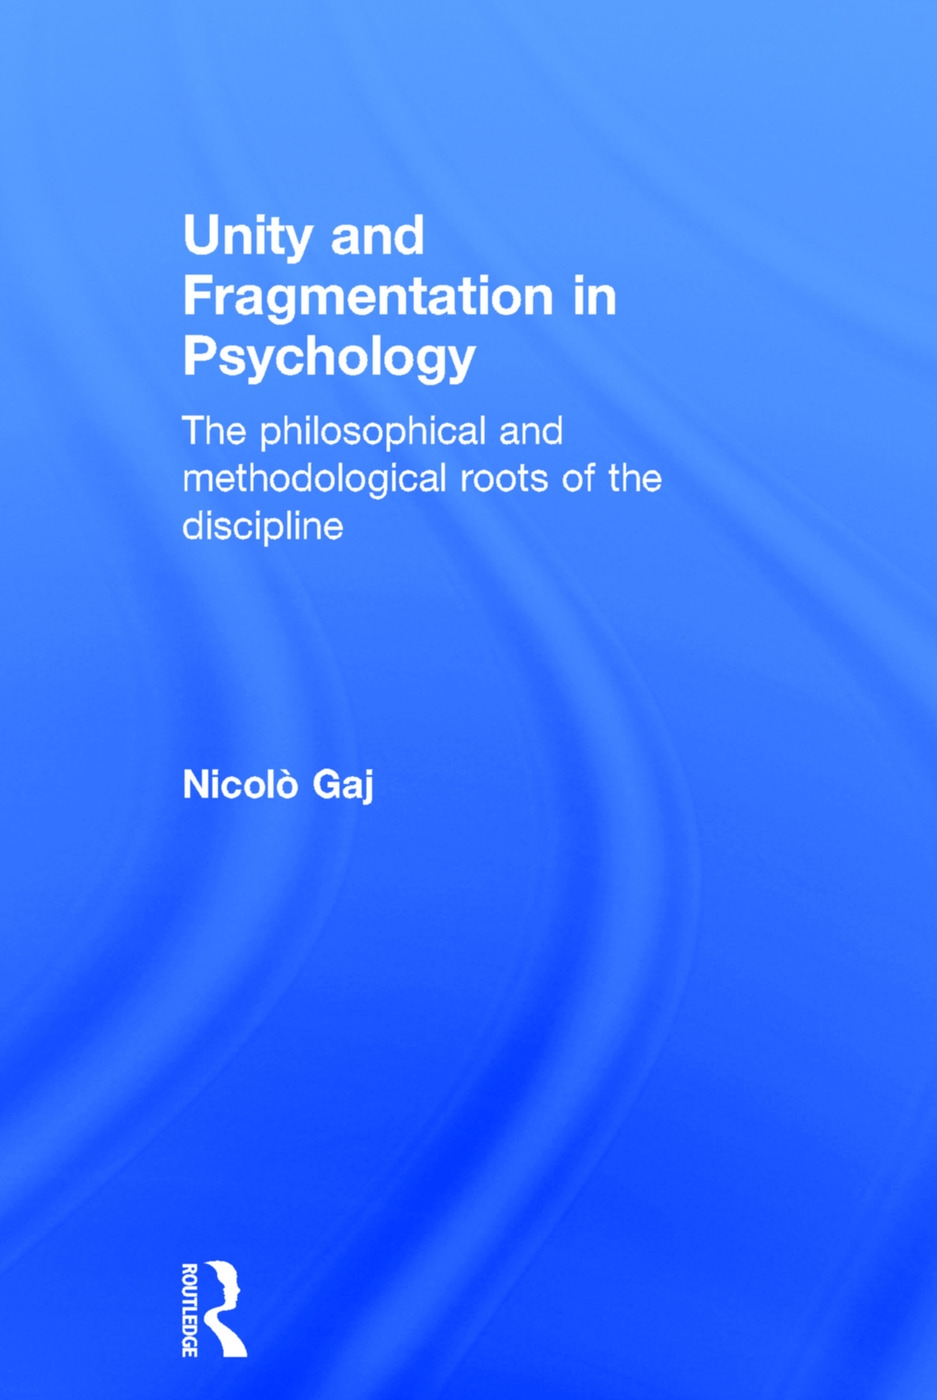 Unity and Fragmentation in Psychology: The Philosophical and Methodological Roots of the Discipline